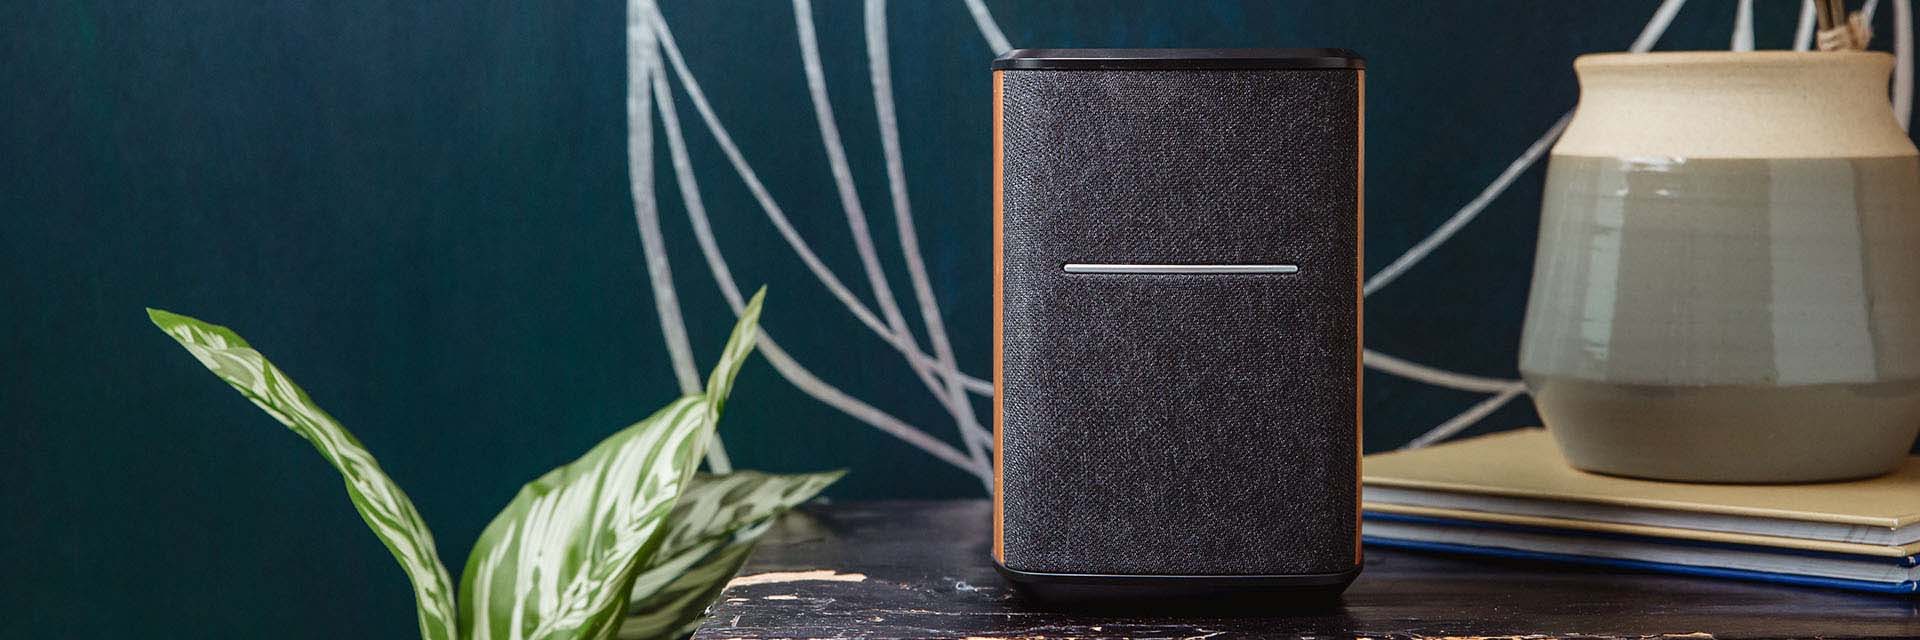 Edifier MS50A Wi-Fi speaker is sitting on a table with pottery and plant